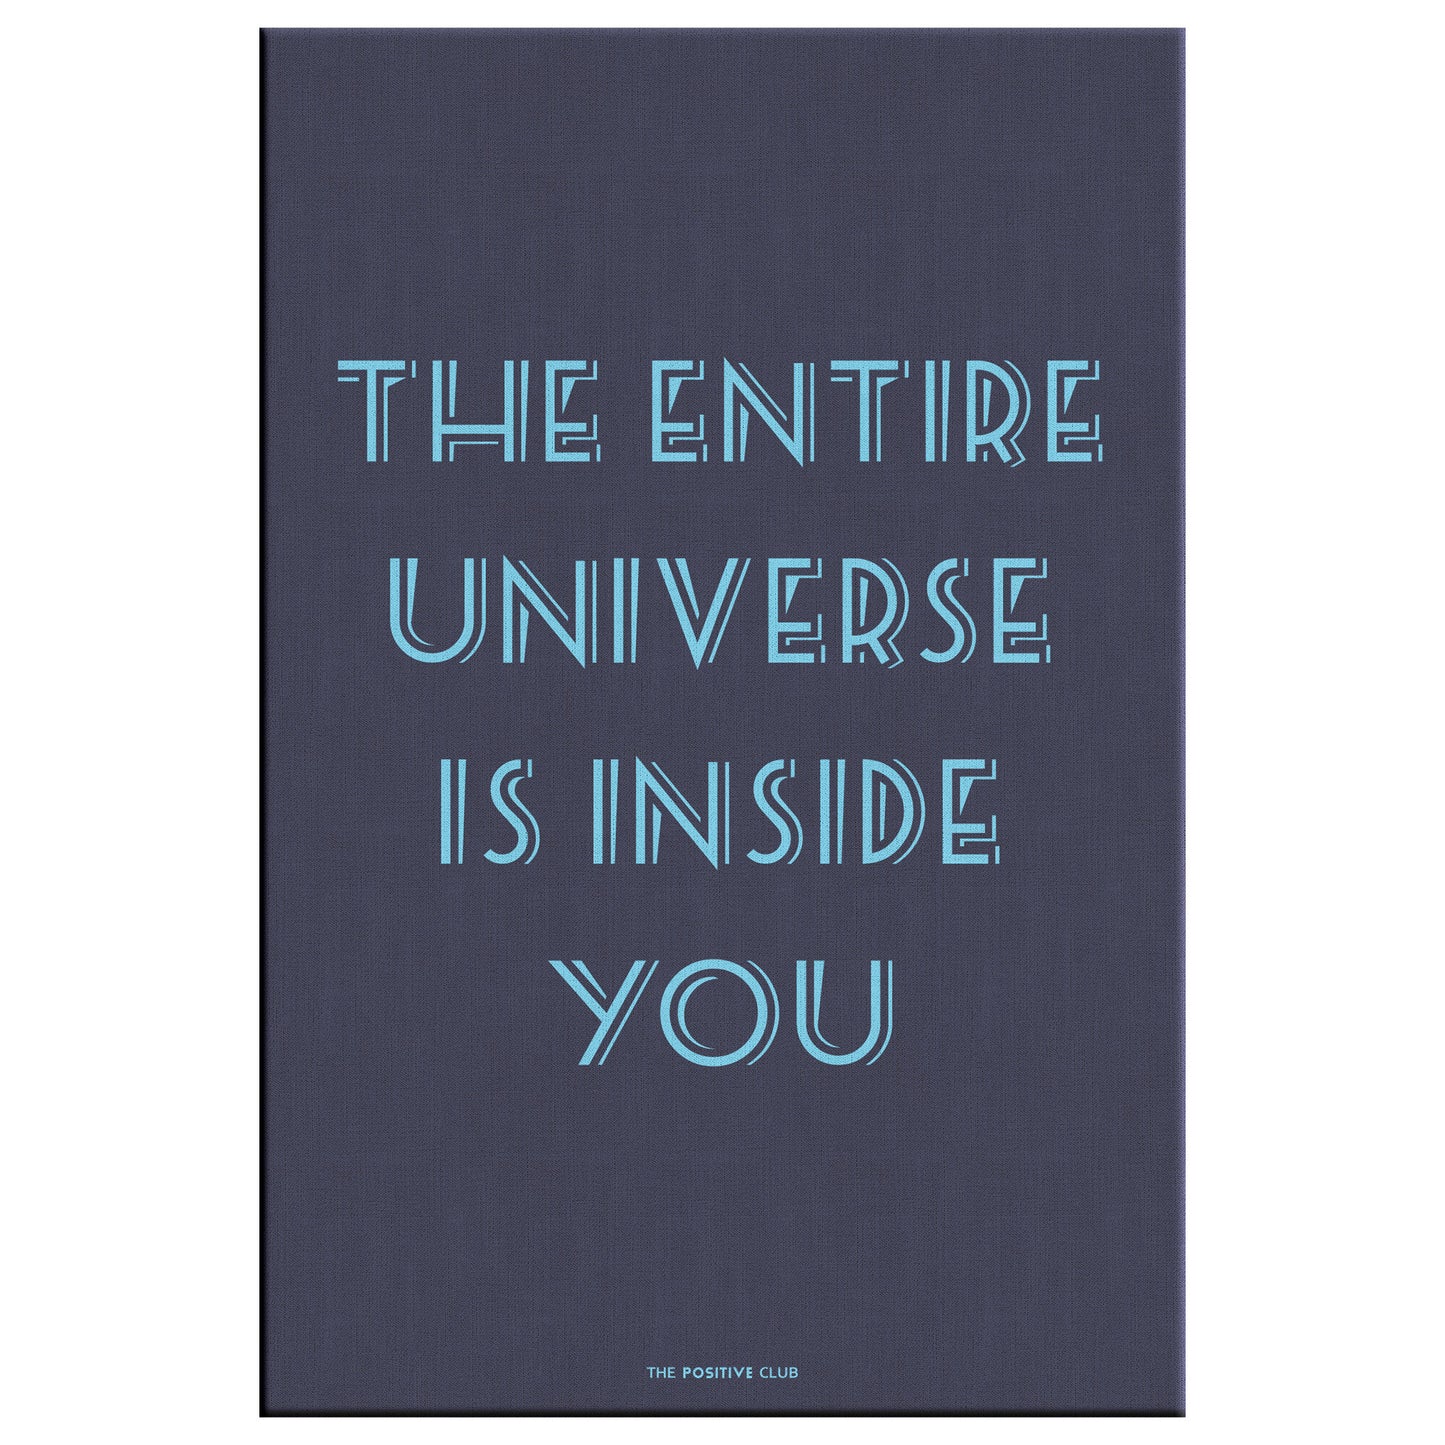 THE ENTIRE UNIVERSE IS INSIDE YOU